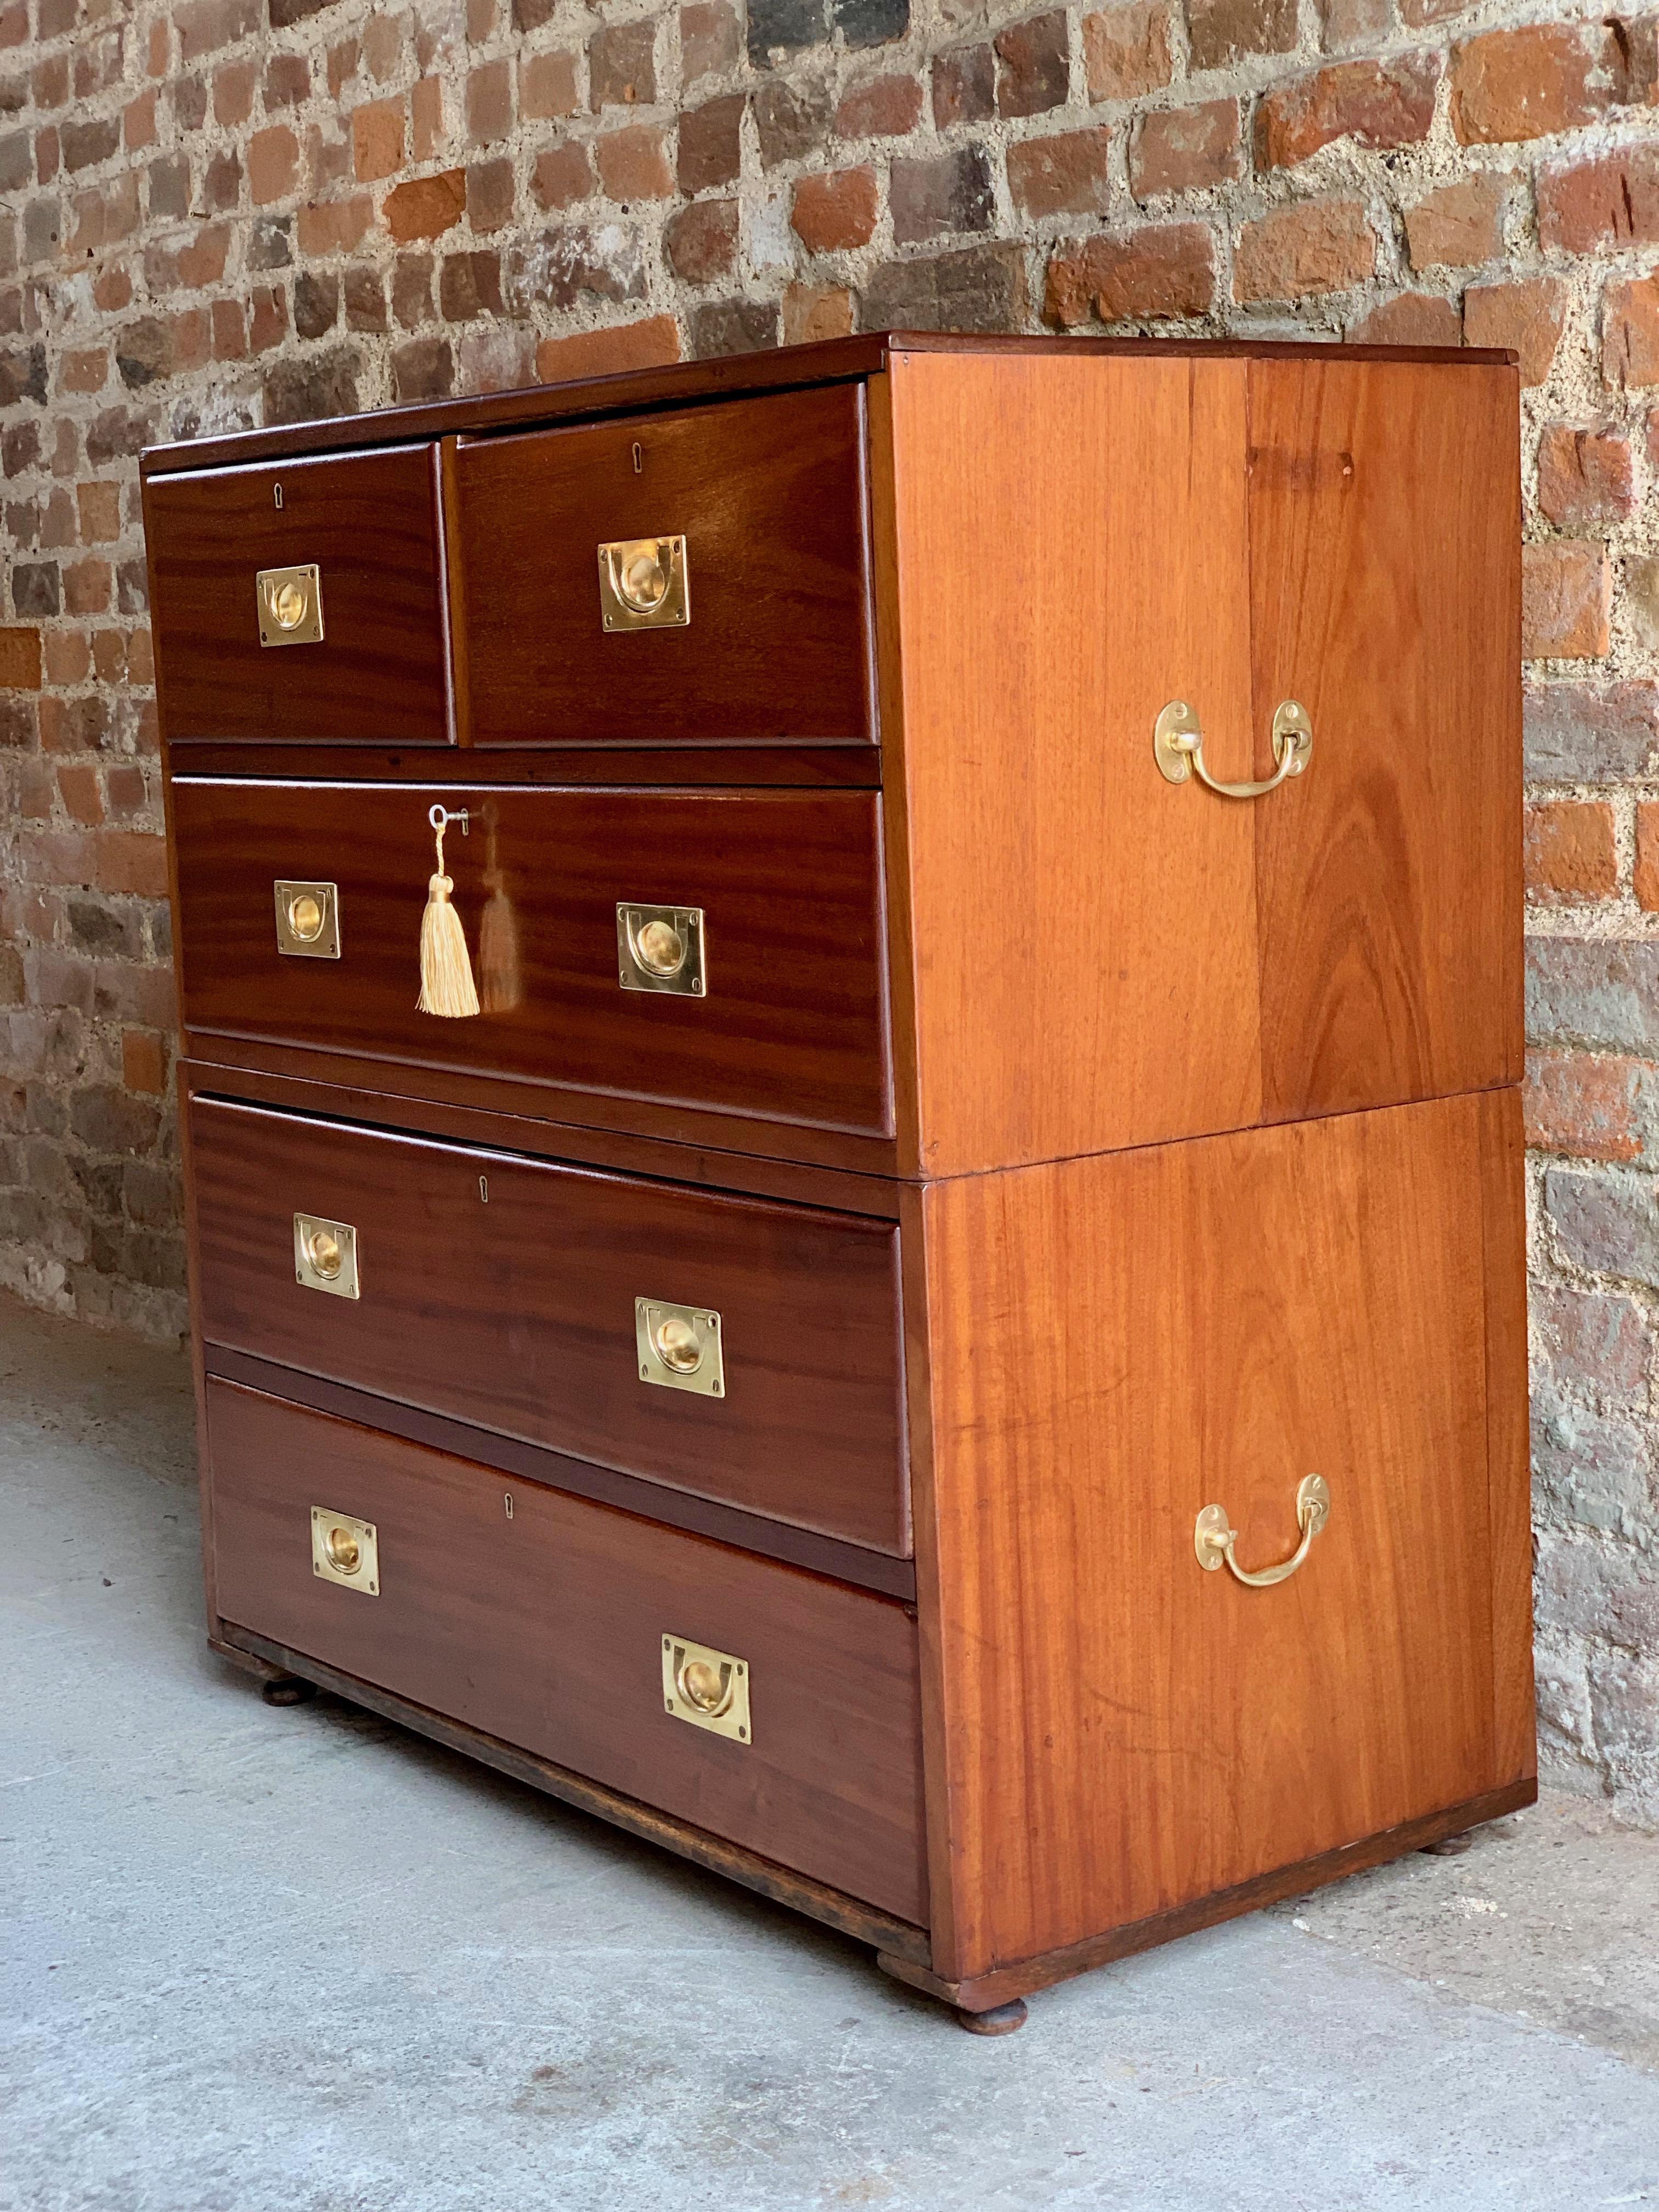 Late 19th Century 19th Century Military Campaign Chest of Drawers in Teak circa 1870 No 23